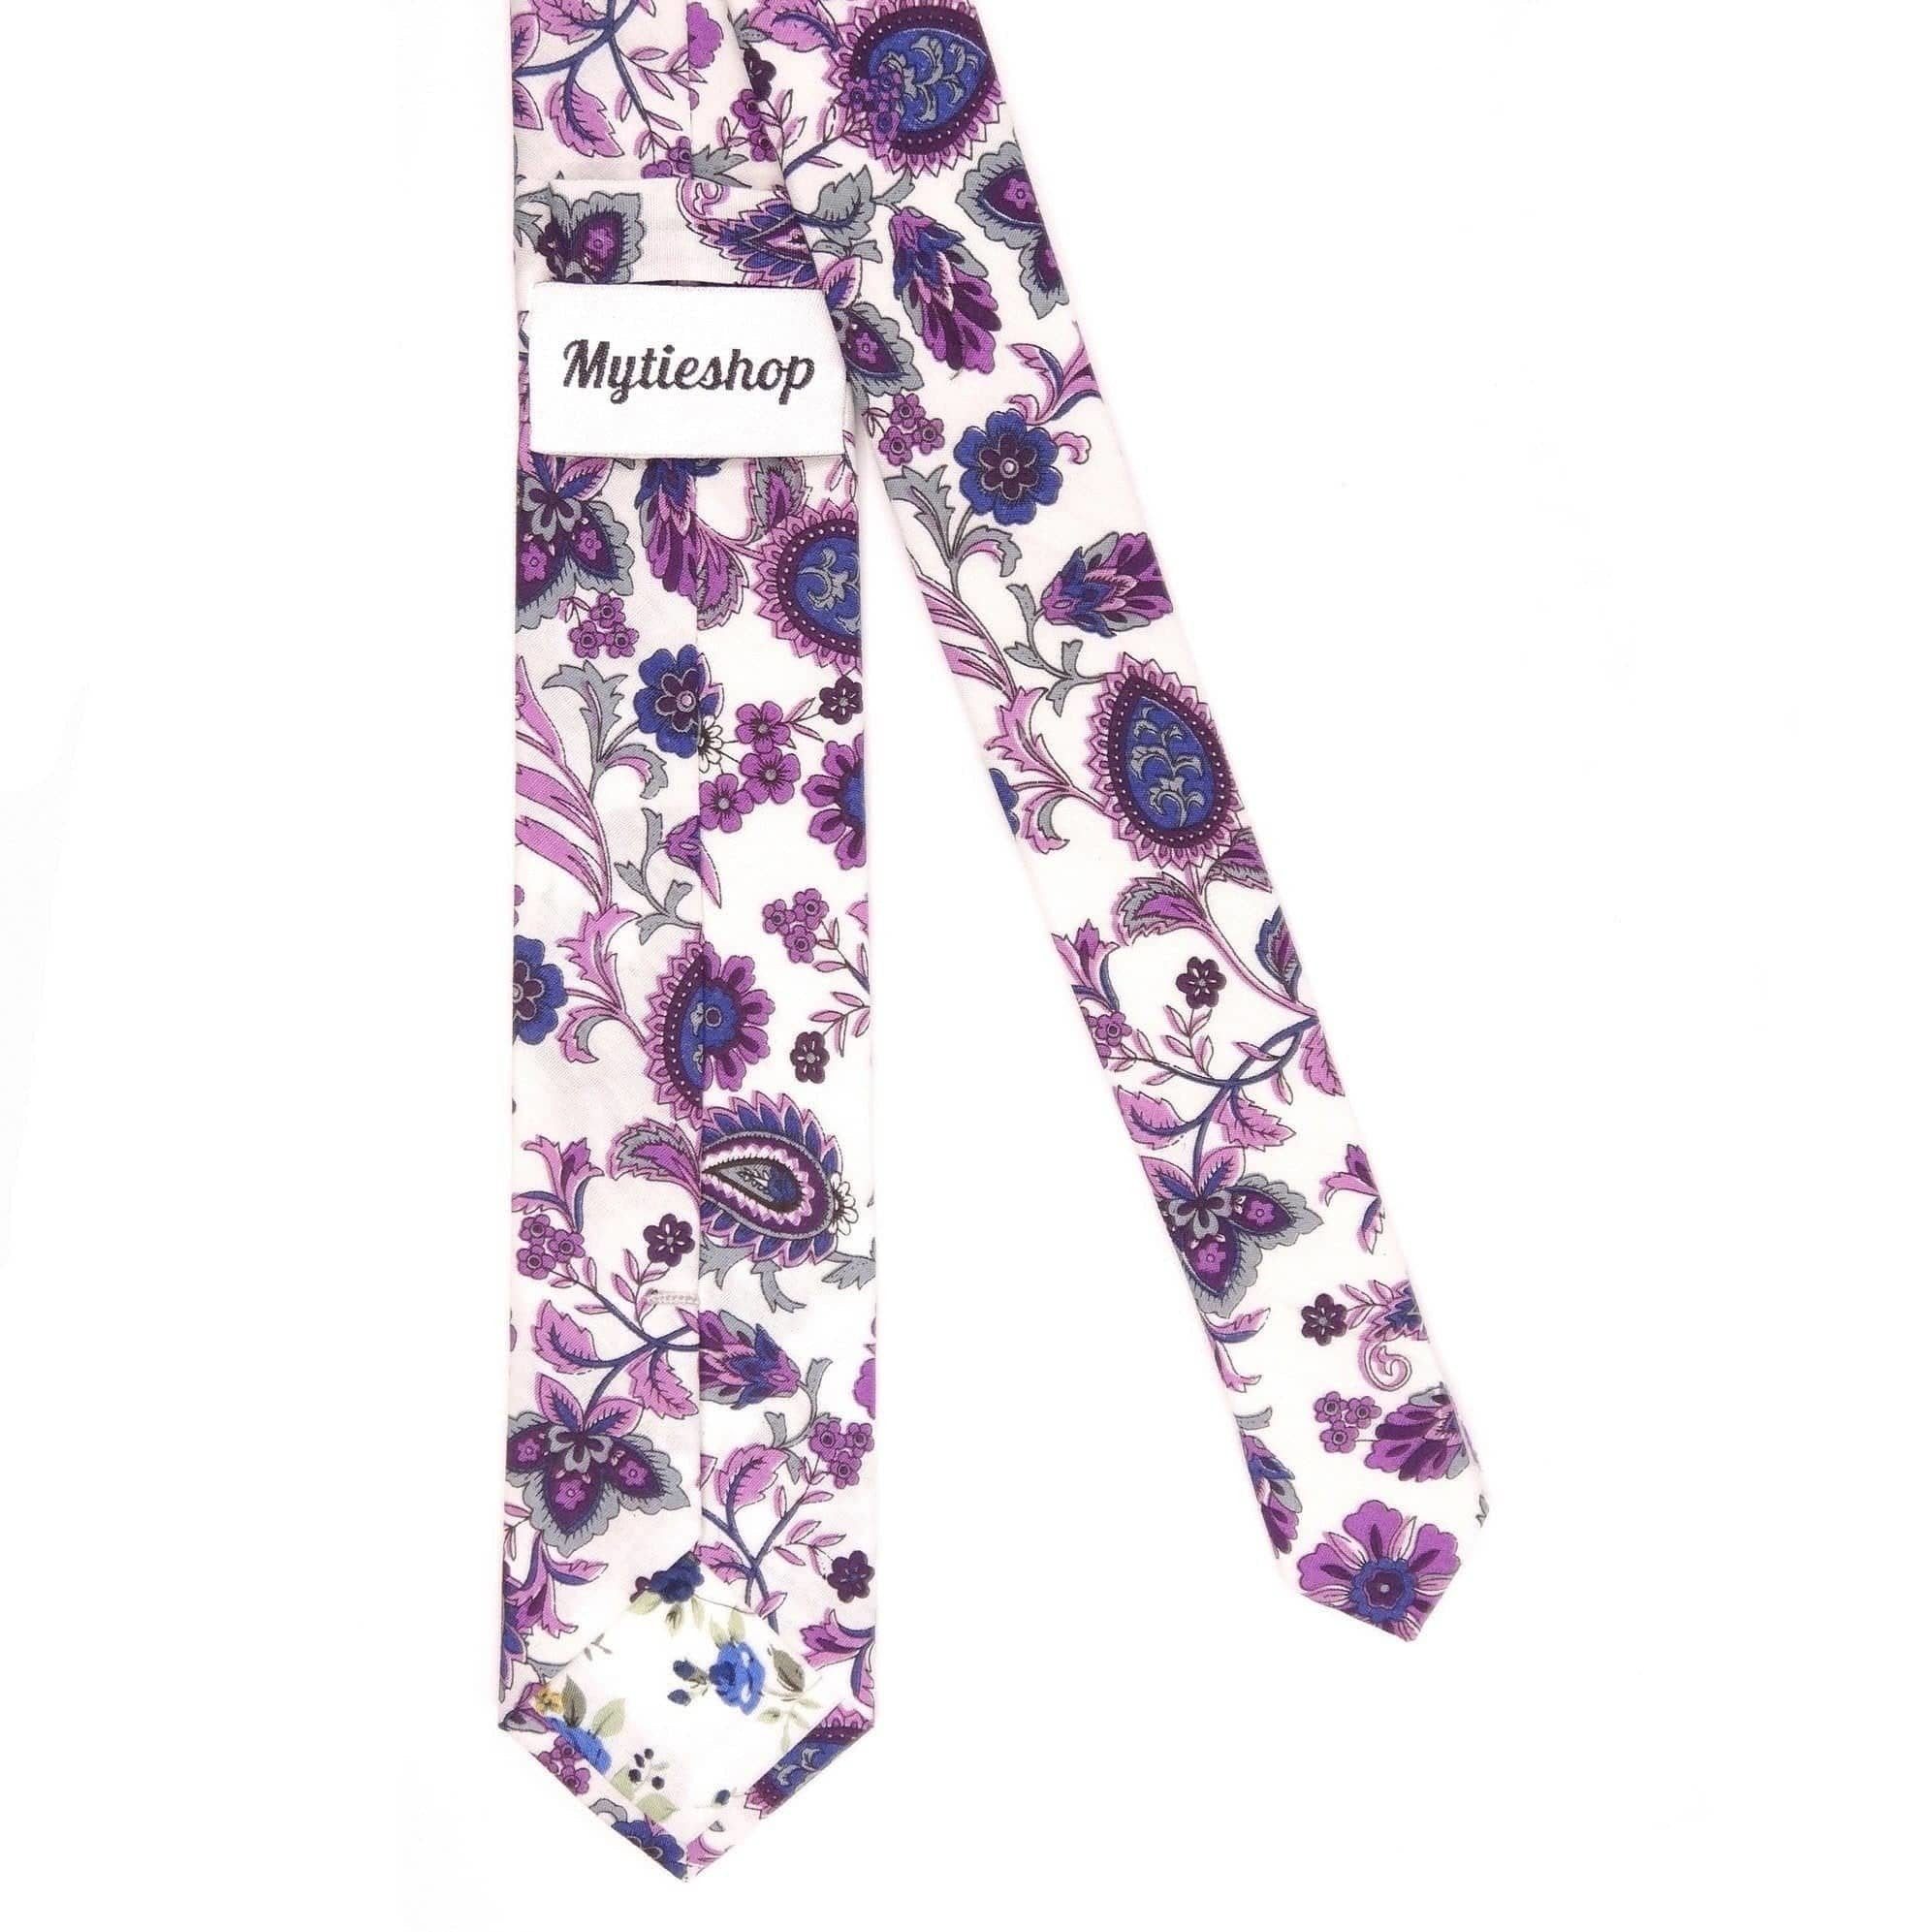 White floral print tie 2.36&quot; WINSTON - MYTIESHOP-Neckties-White floral print tie with purple flowers print for wedding groom groomsmen. Neckties for men, prom formals missions floral ties. dope ties designs.-Mytieshop. Skinny ties for weddings anniversaries. Father of bride. Groomsmen. Cool skinny neckties for men. Neckwear for prom, missions and fancy events. Gift ideas for men. Anniversaries ideas. Wedding aesthetics. Flower ties. Dry flower ties.